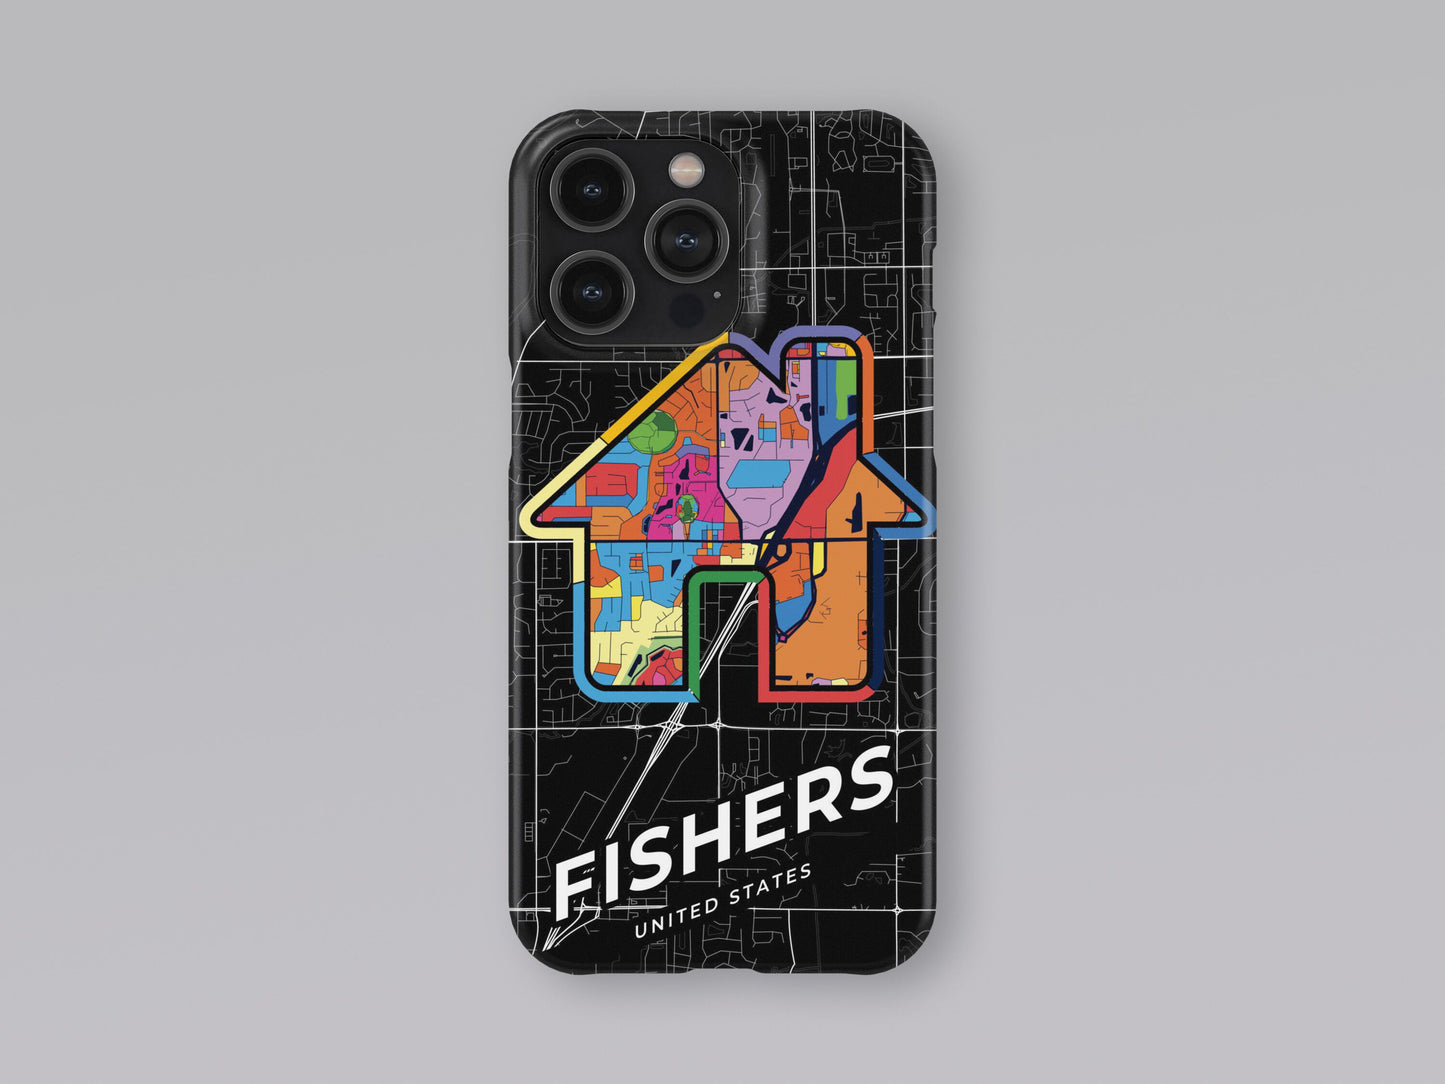 Fishers Indiana slim phone case with colorful icon. Birthday, wedding or housewarming gift. Couple match cases. 3